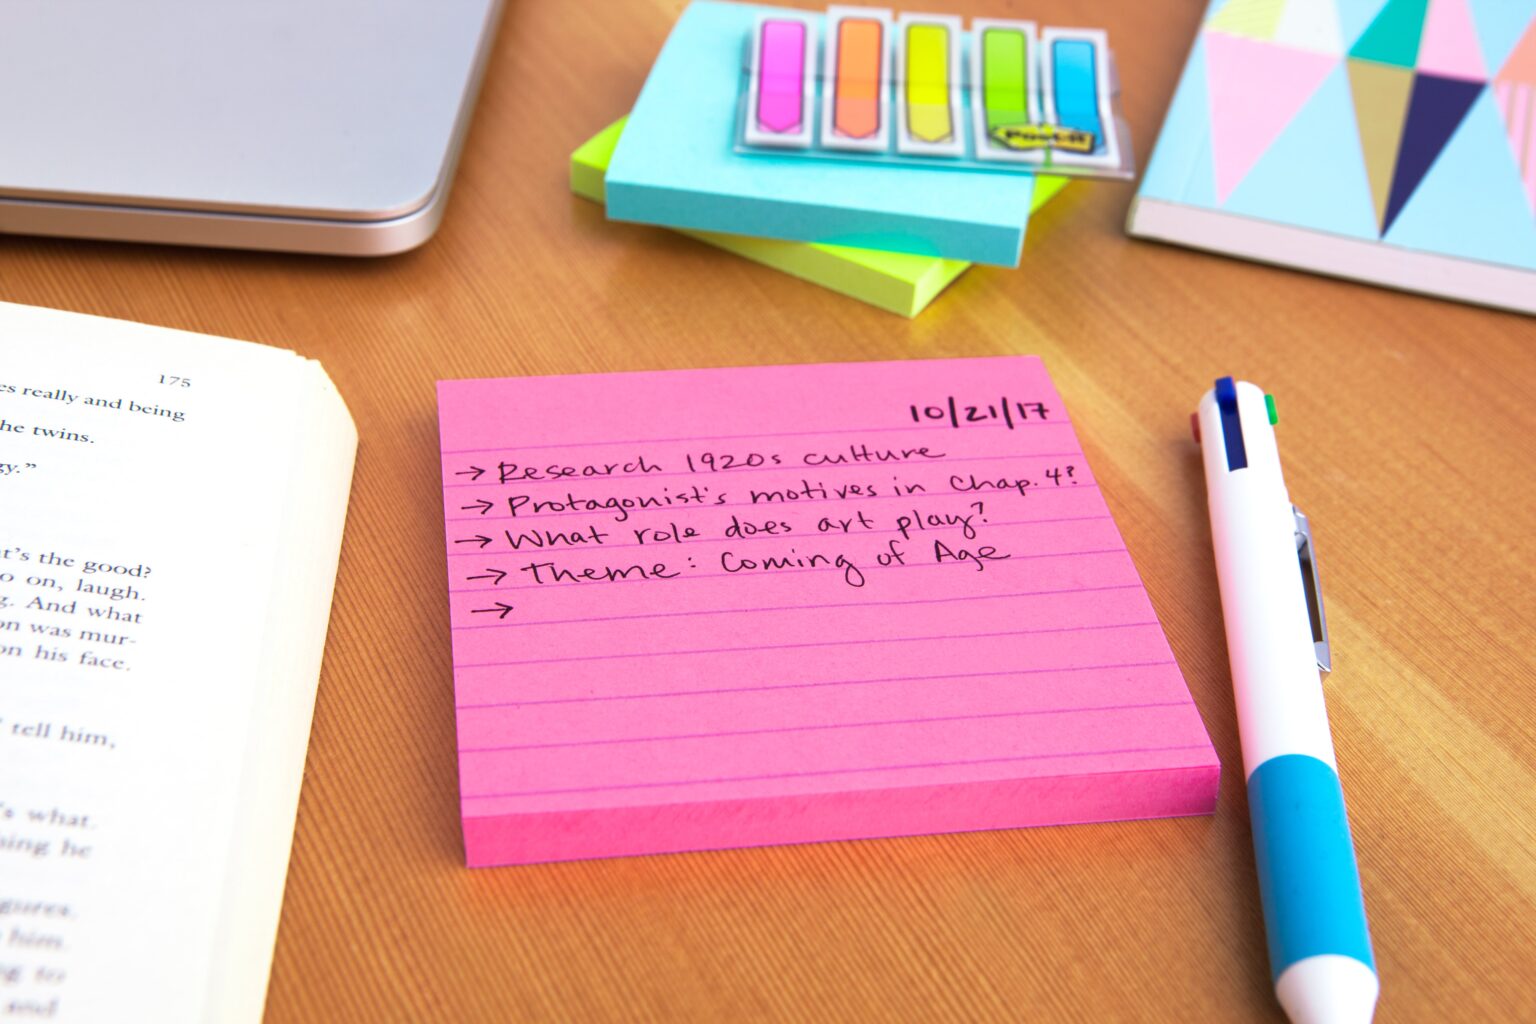 Post-it note with to-do list on